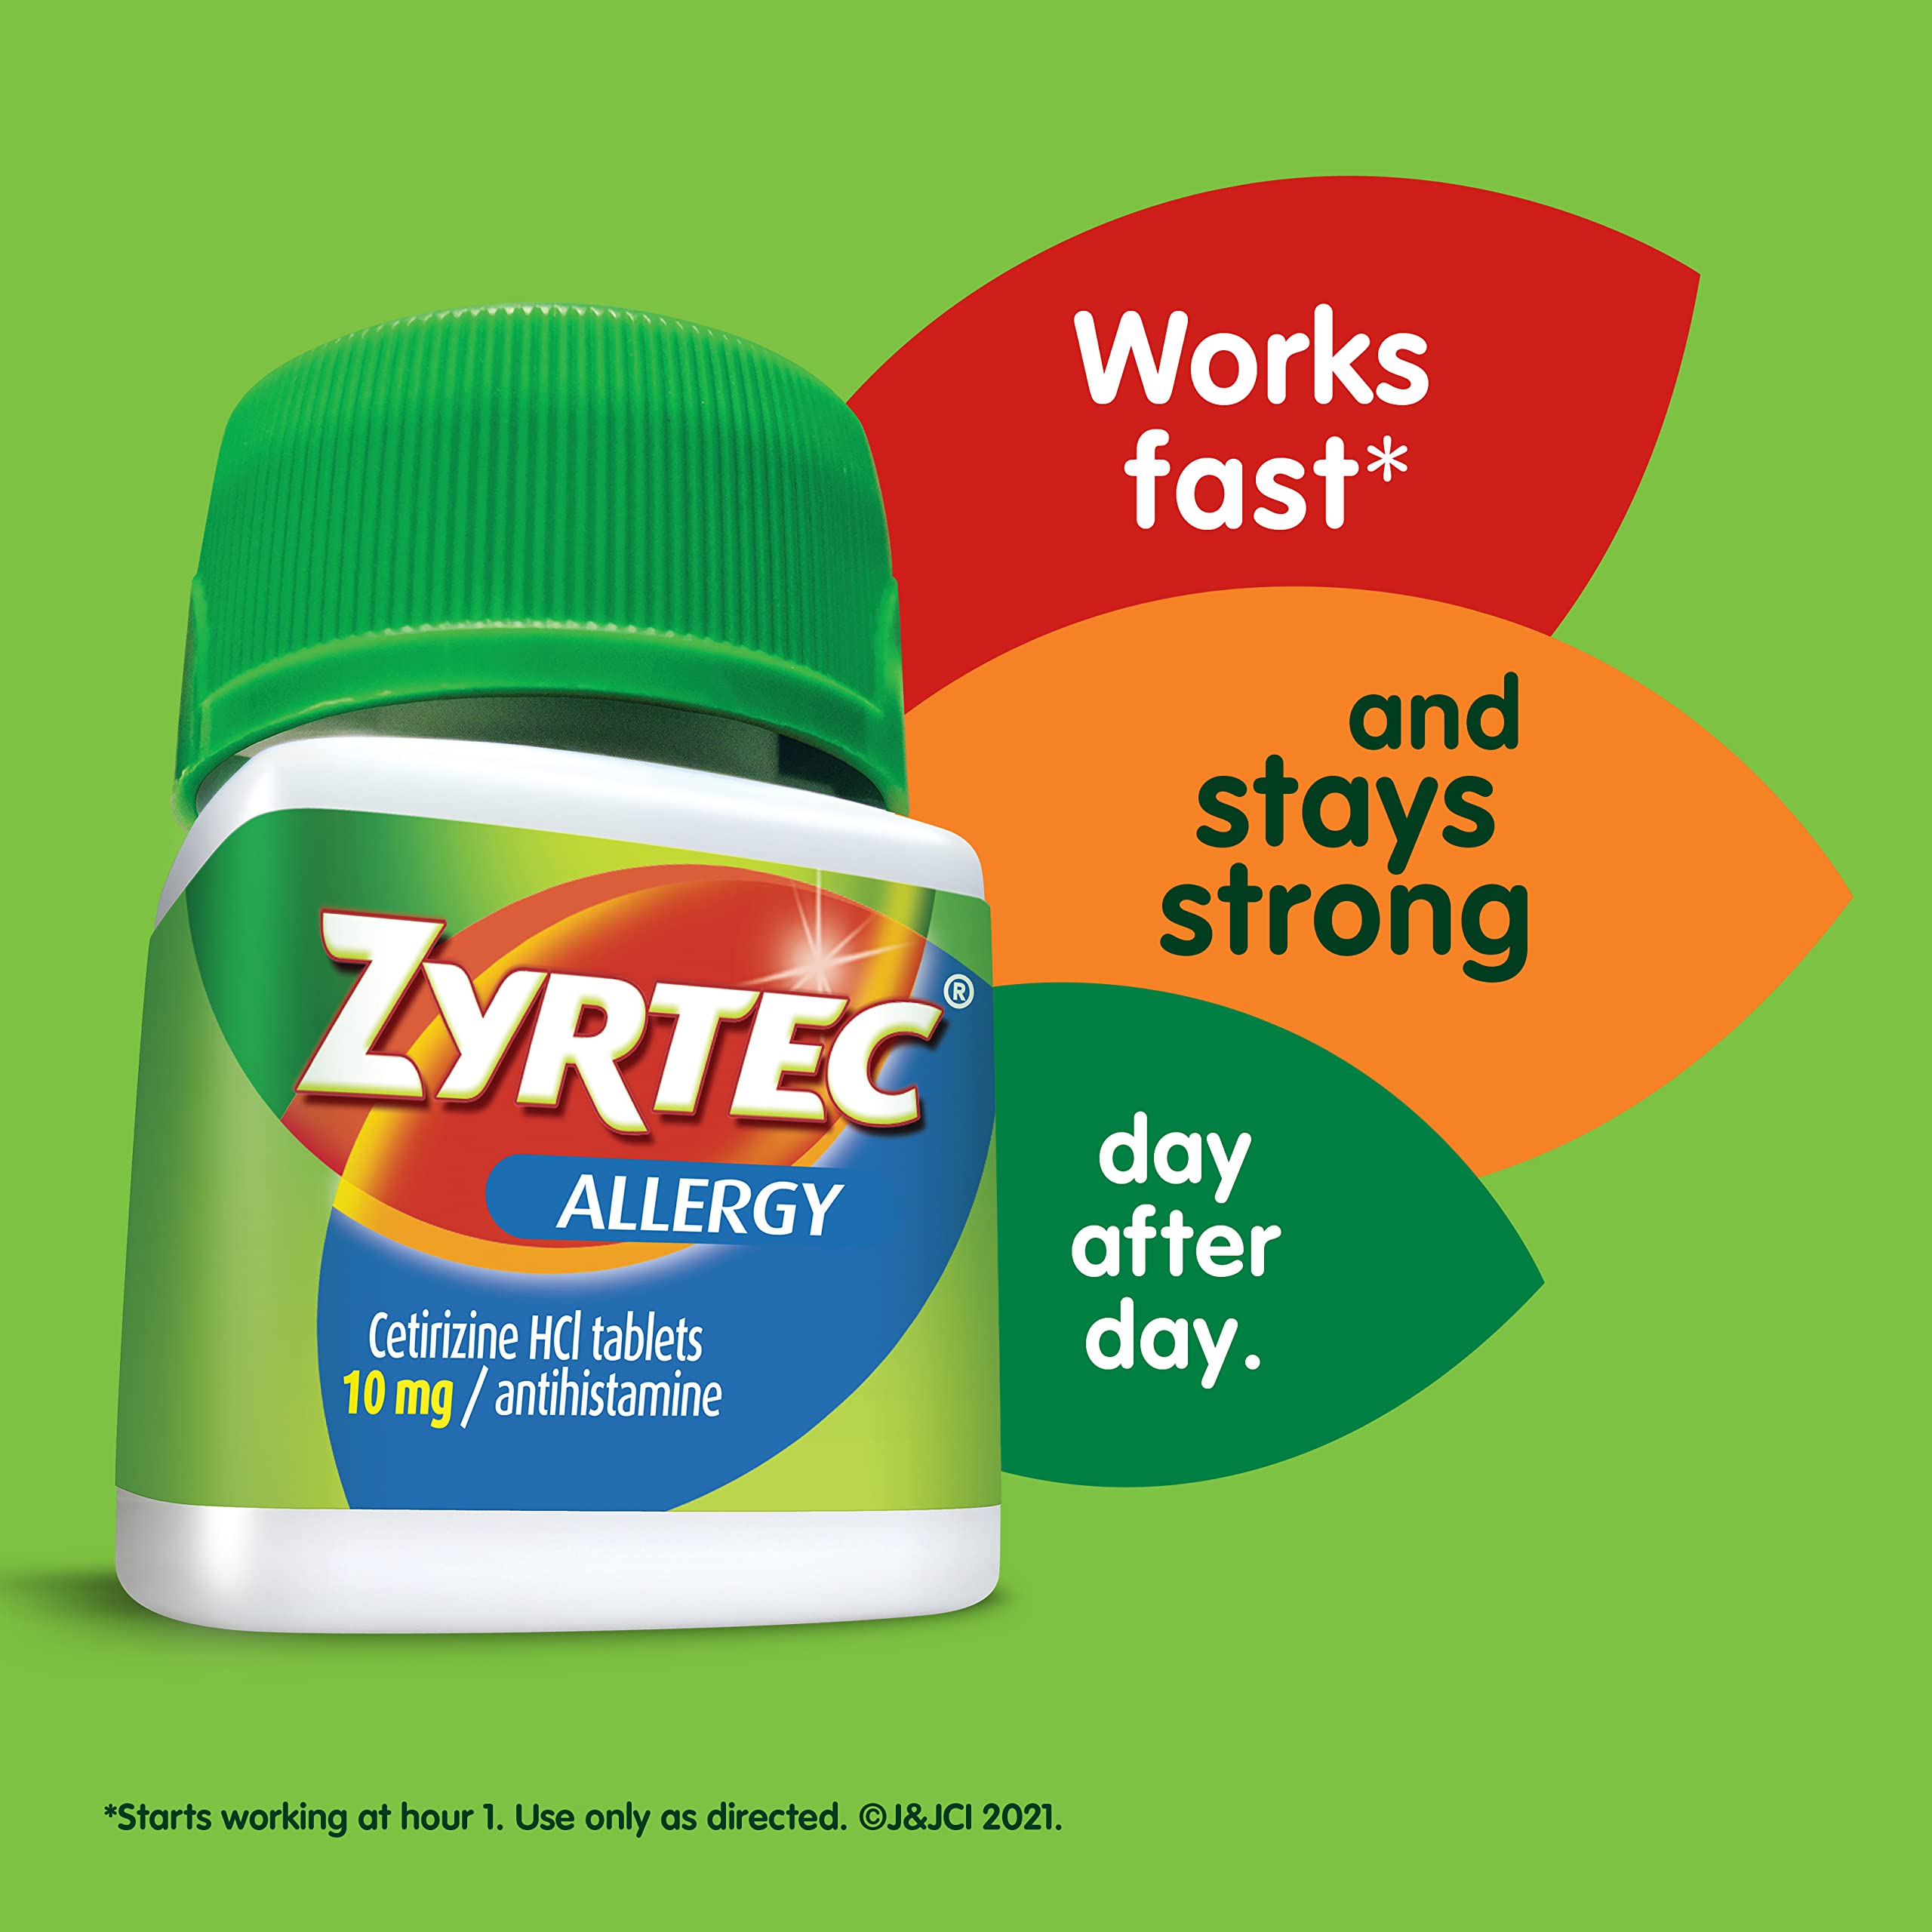 Zyrtec 24 Hour Allergy Relief Tablets, Bundle with 1 x 30ct and 3 x 1ct Travel Packs